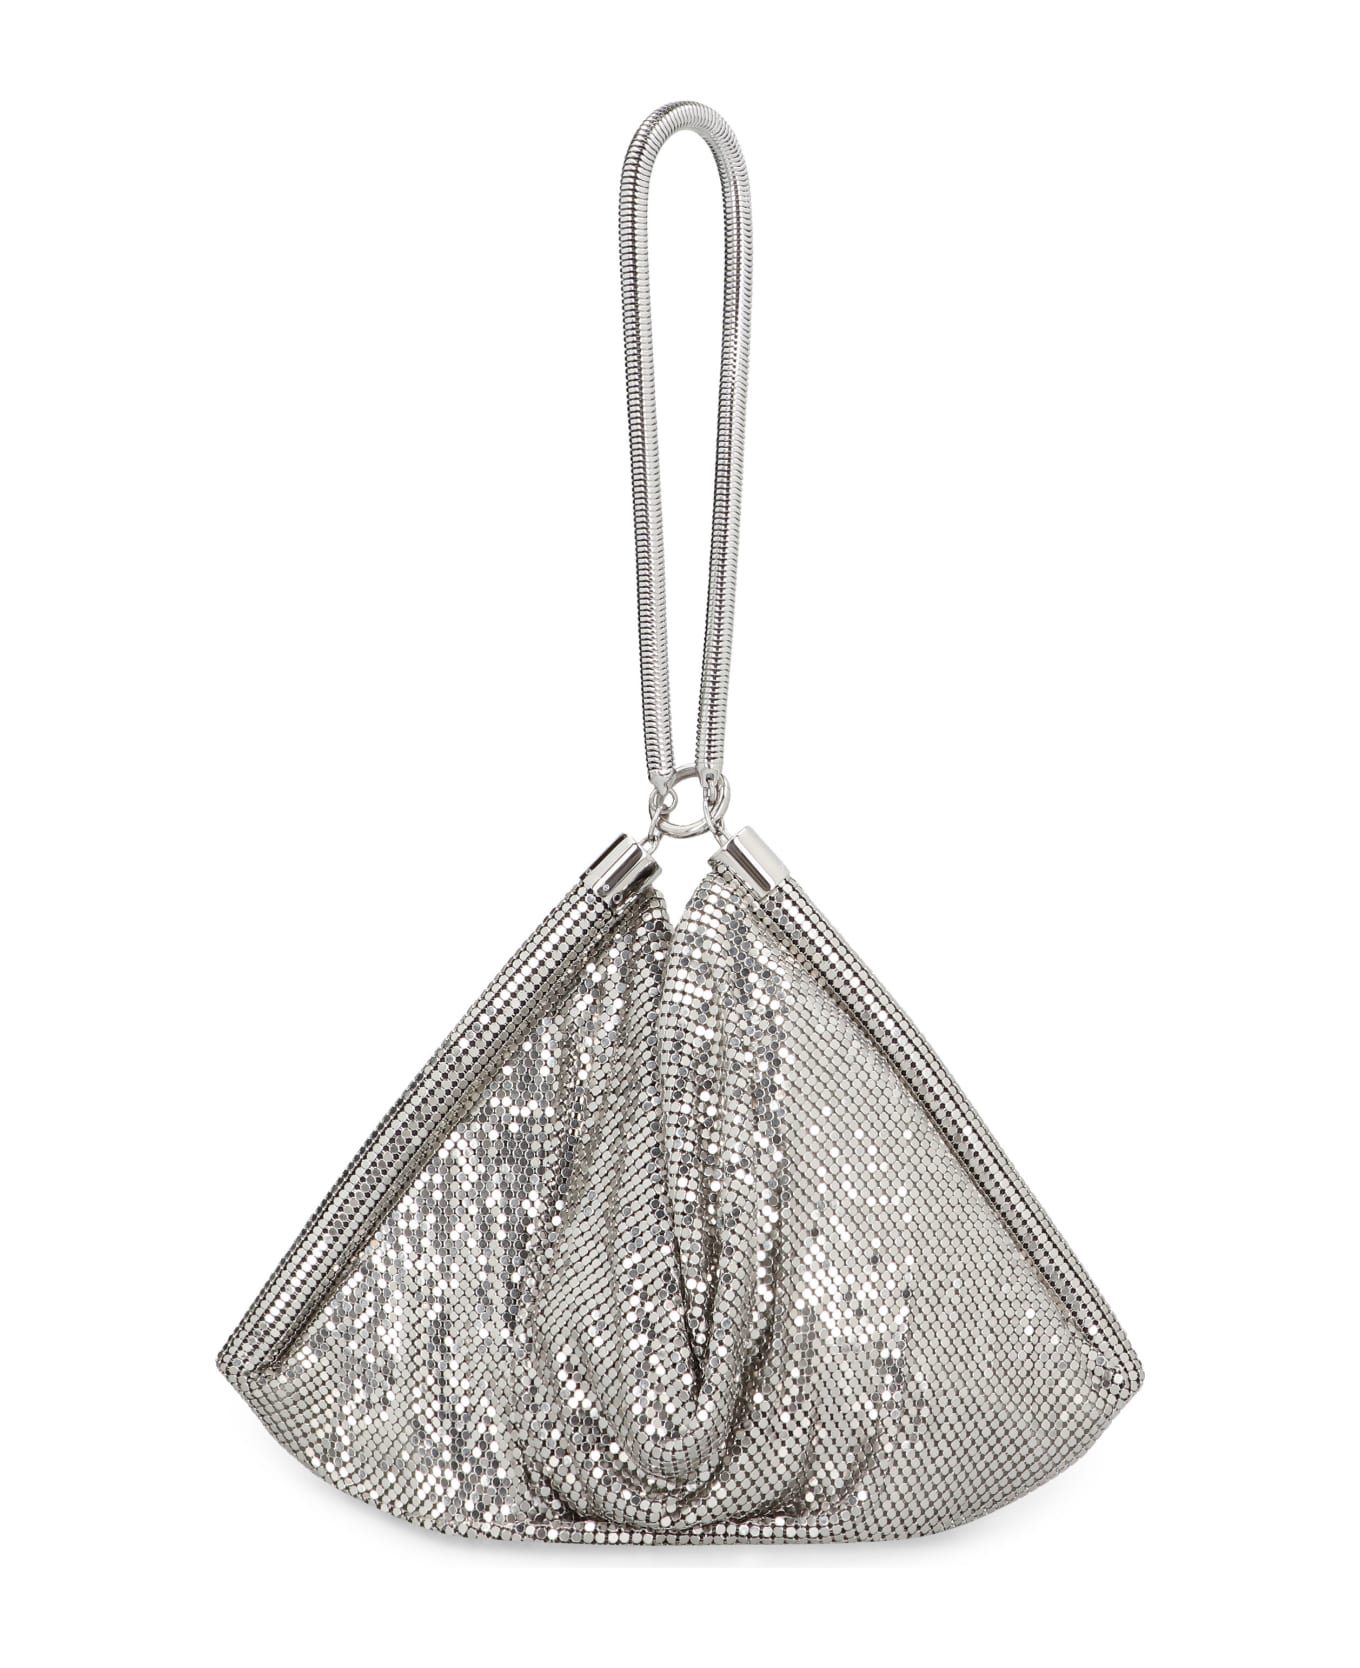 Paco Rabanne Chainmail Pocket Bag - Silver